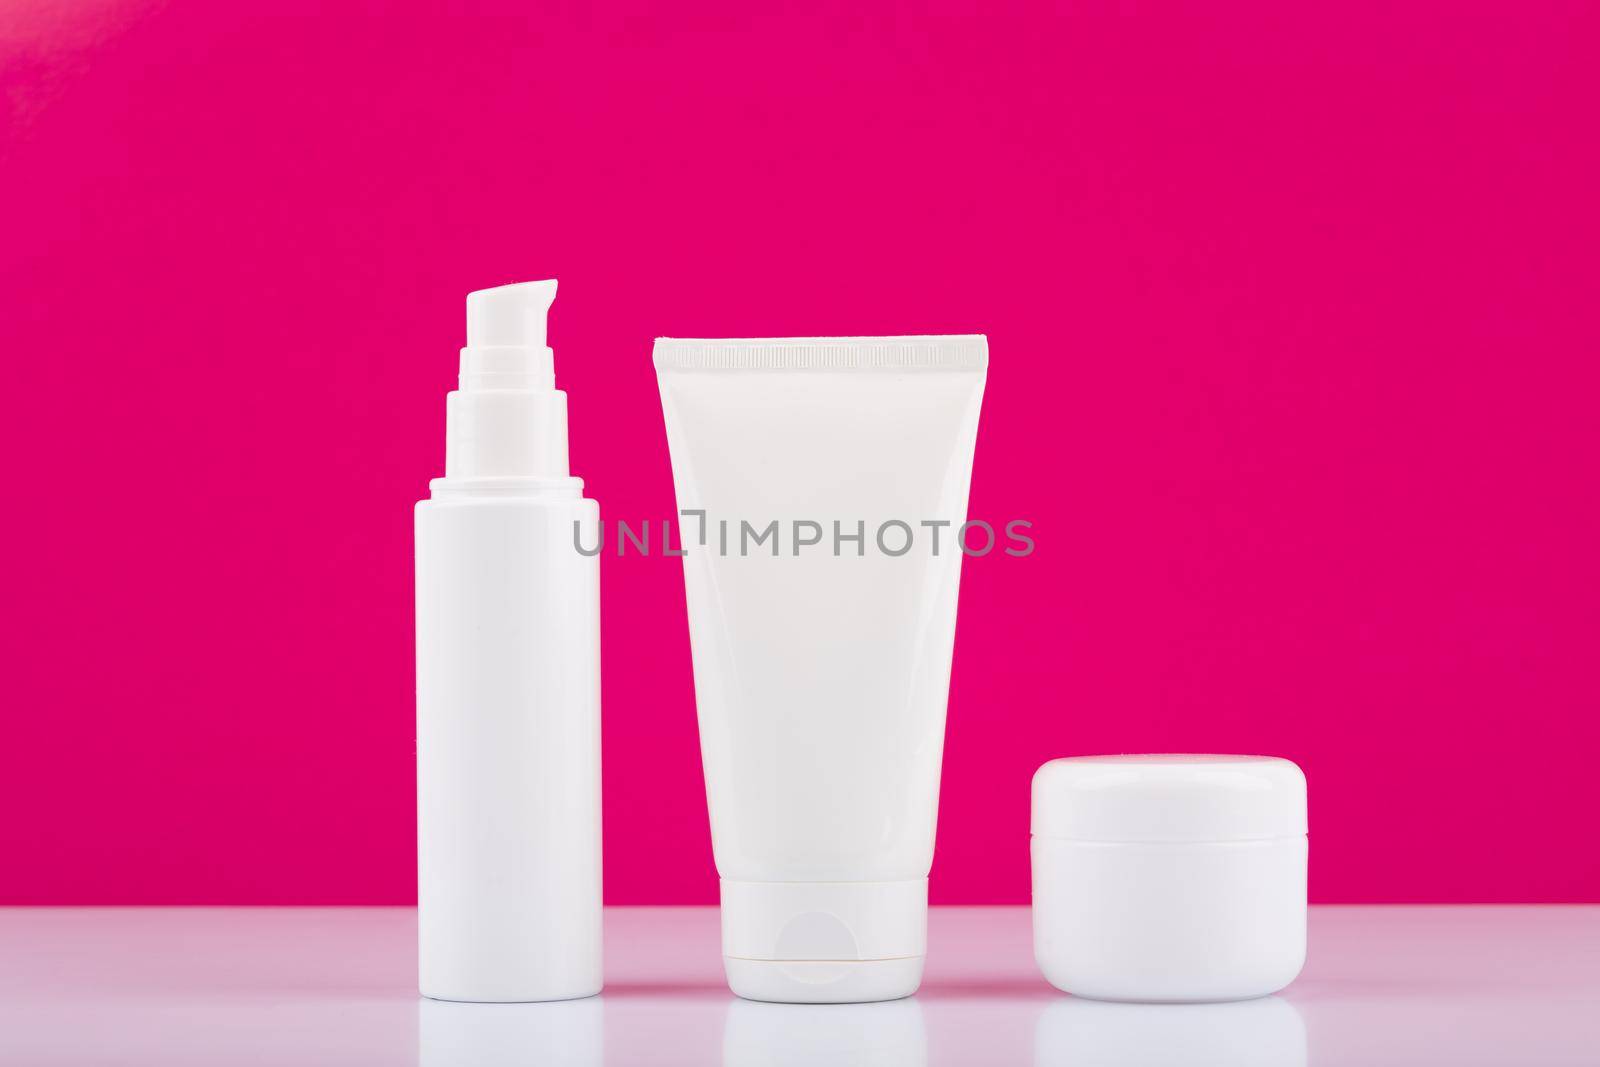 Minimalistic still life with three white glossy cream jars on white table against pink background. Concept of daily skin care. High quality photo